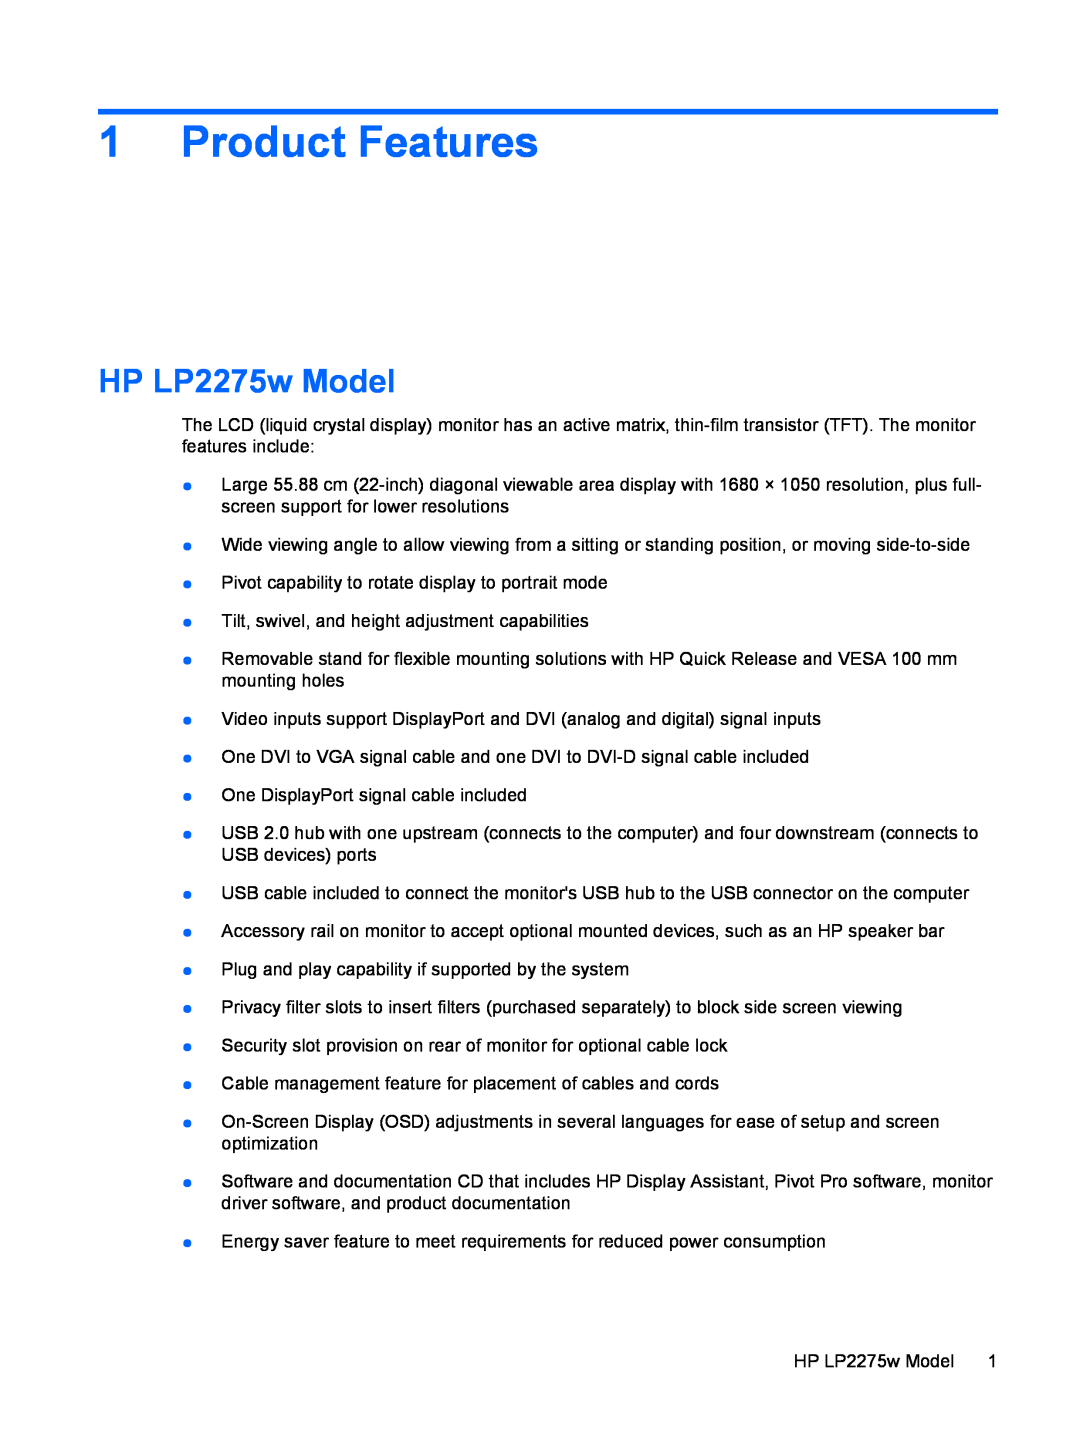 HP manual Product Features, HP LP2275w Model 